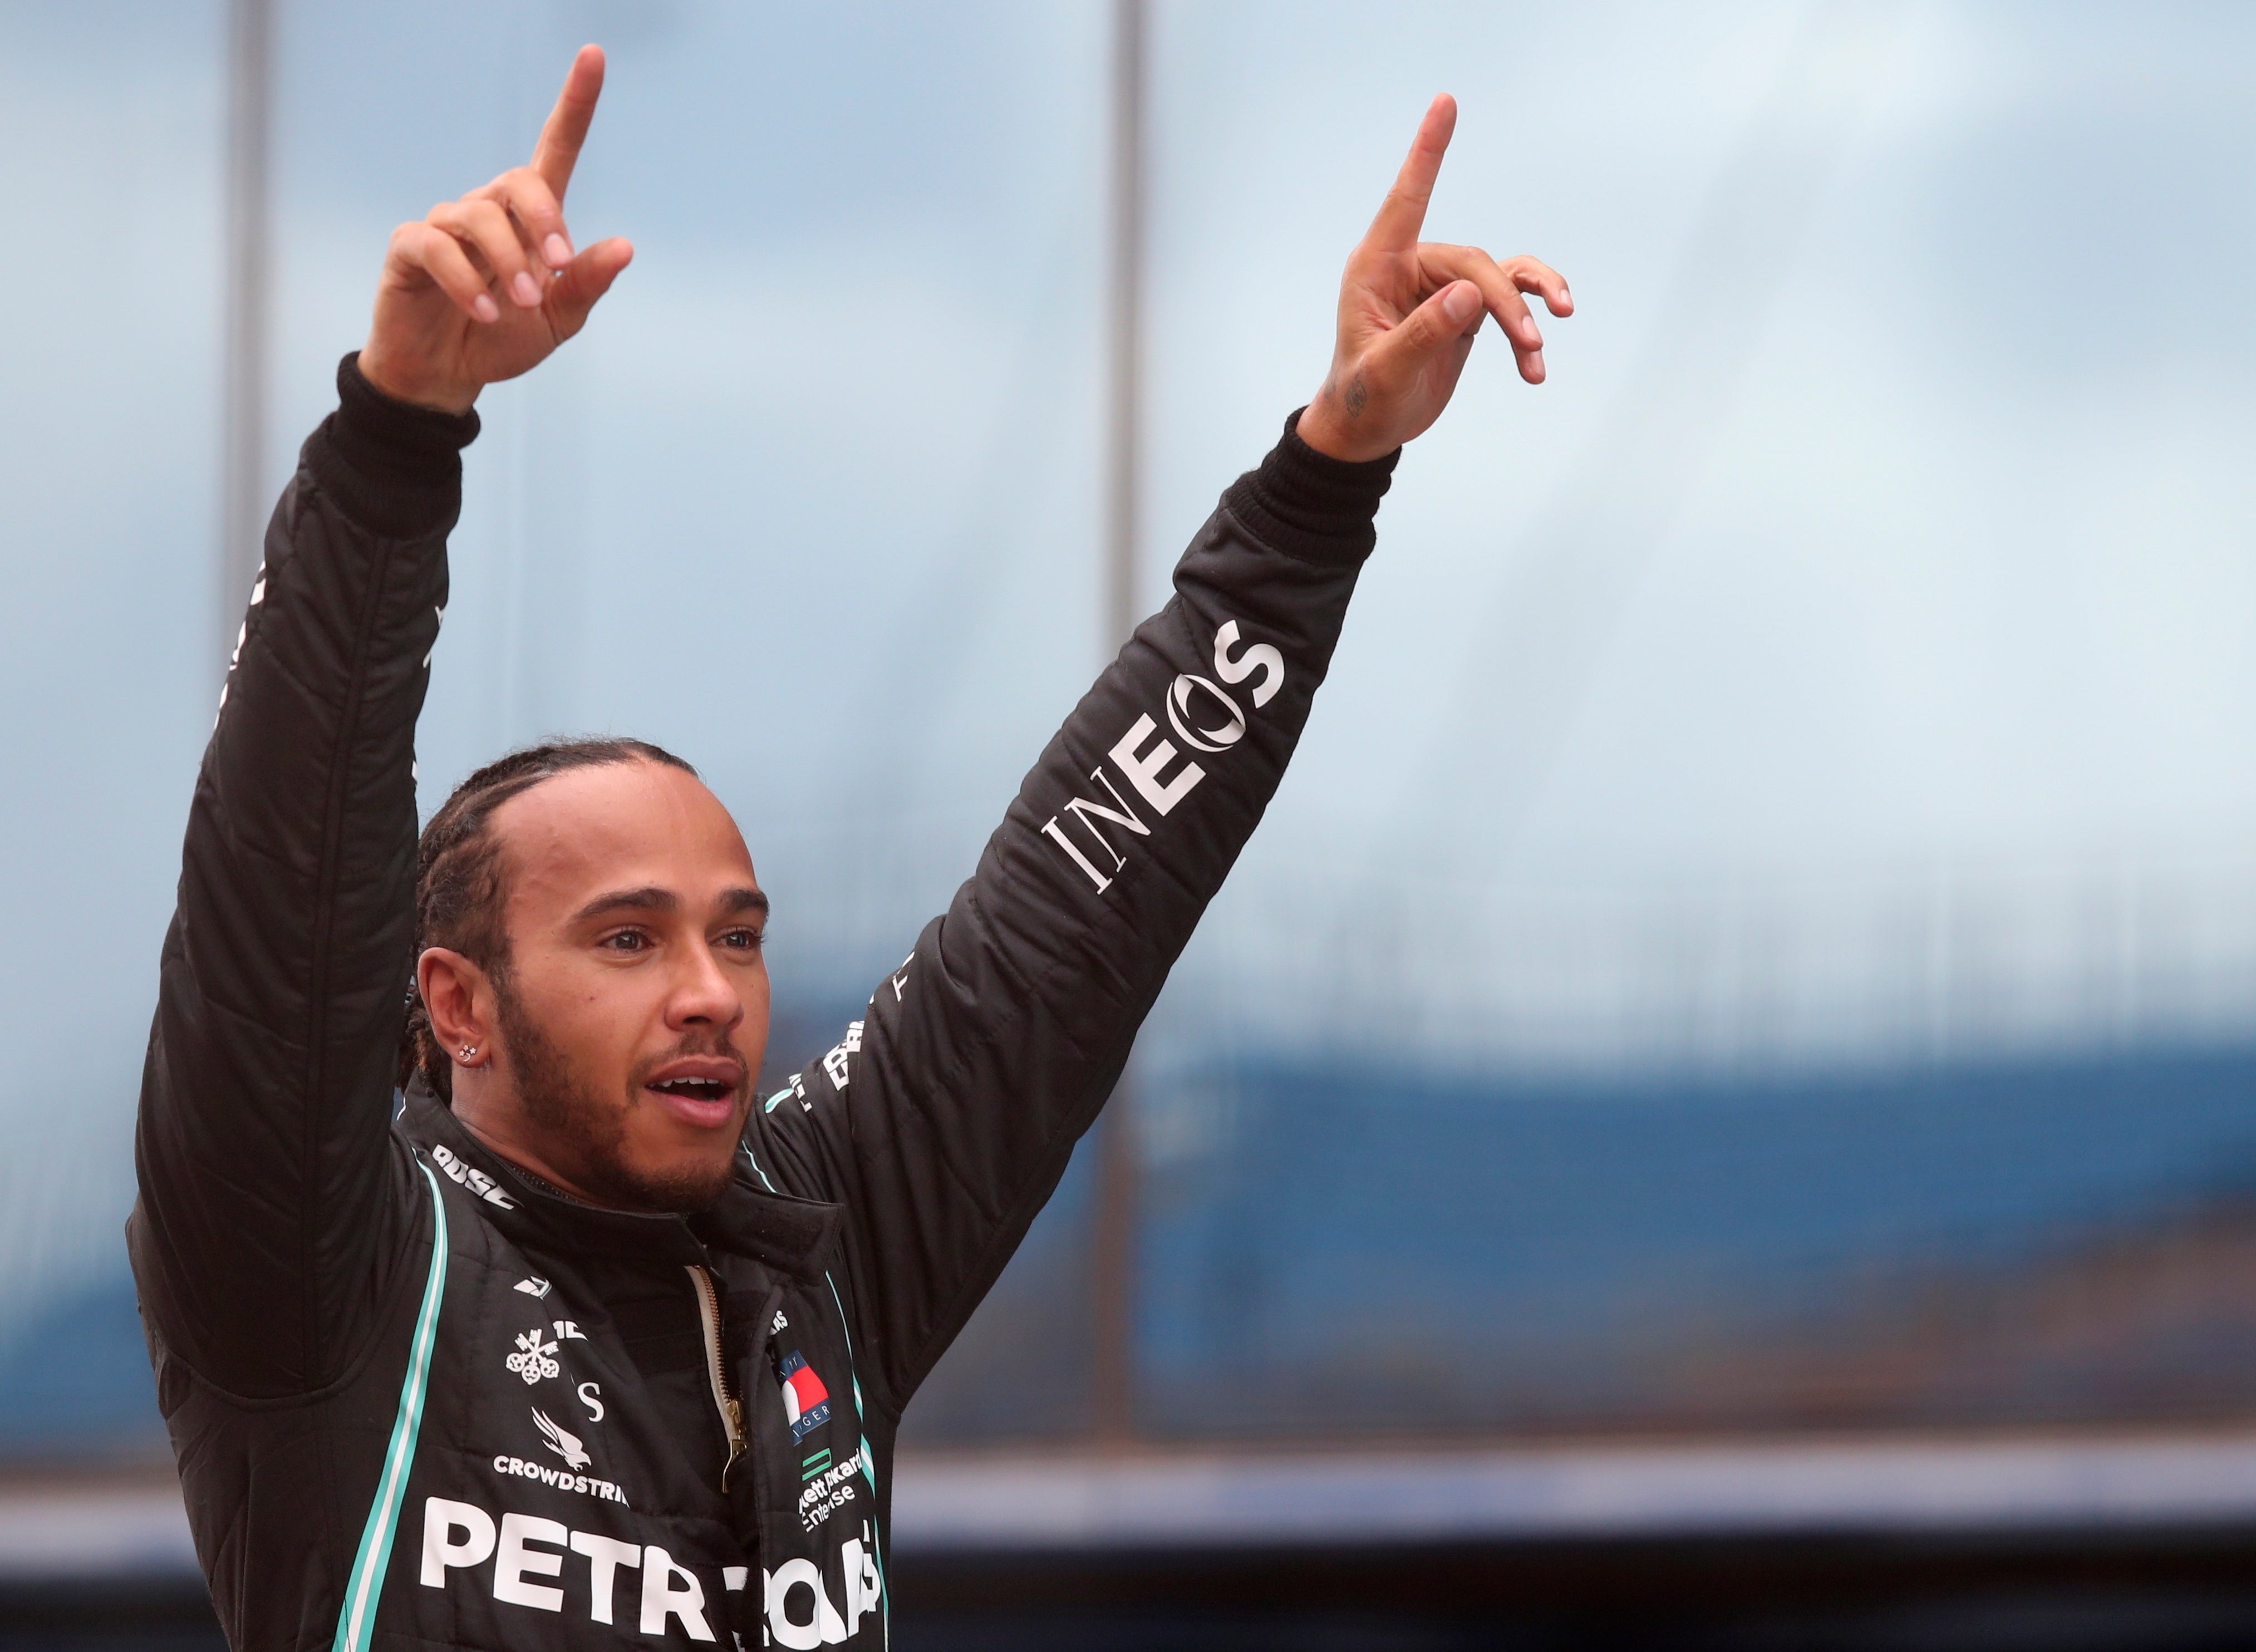 Lewis Hamilton celebrates winning the Turkish Grand Prix and with it a seventh world championship